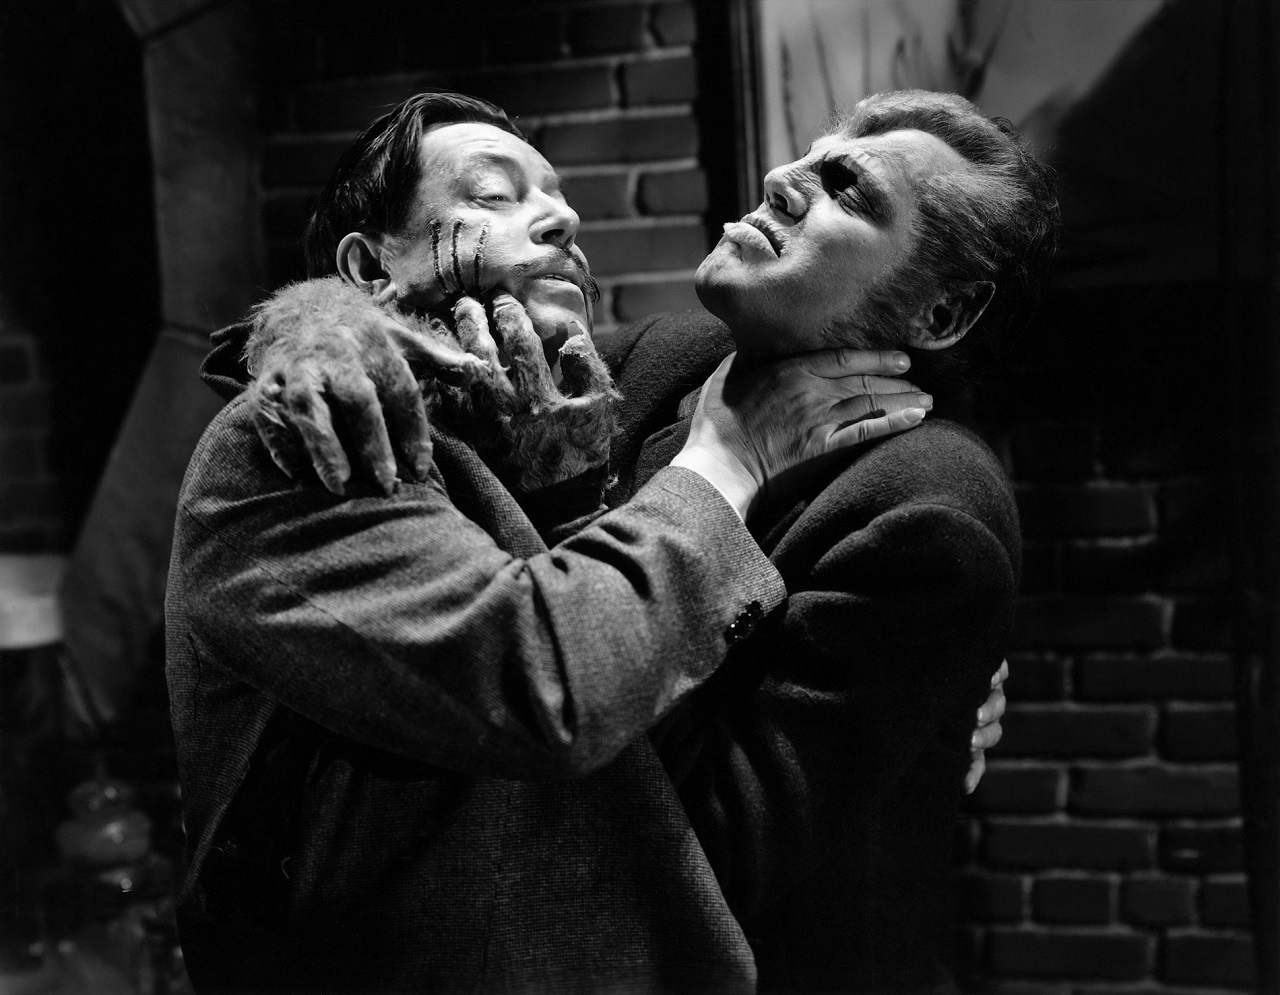 Warner Oland and Henry Hull fight in WereWolf of London (1935)